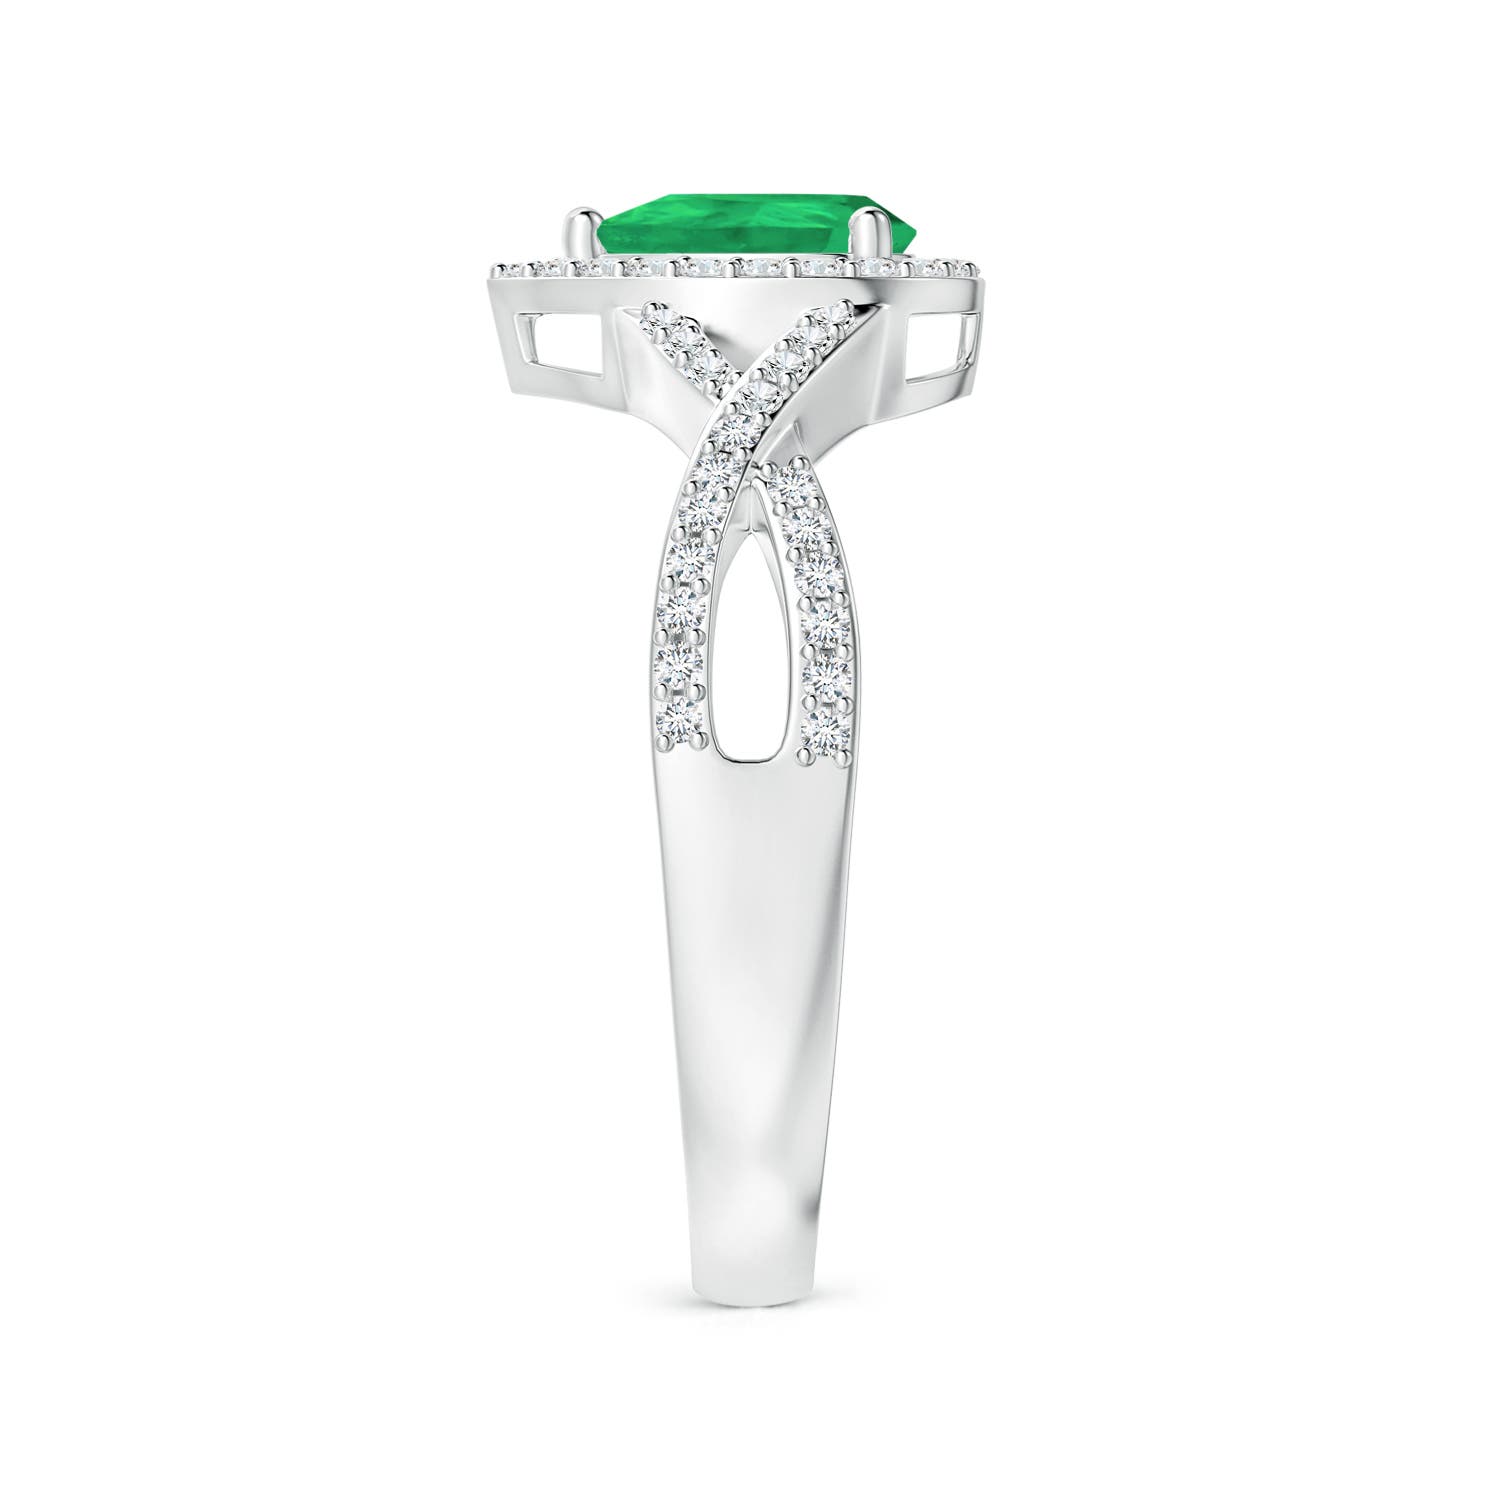 A - Emerald / 0.65 CT / 14 KT White Gold